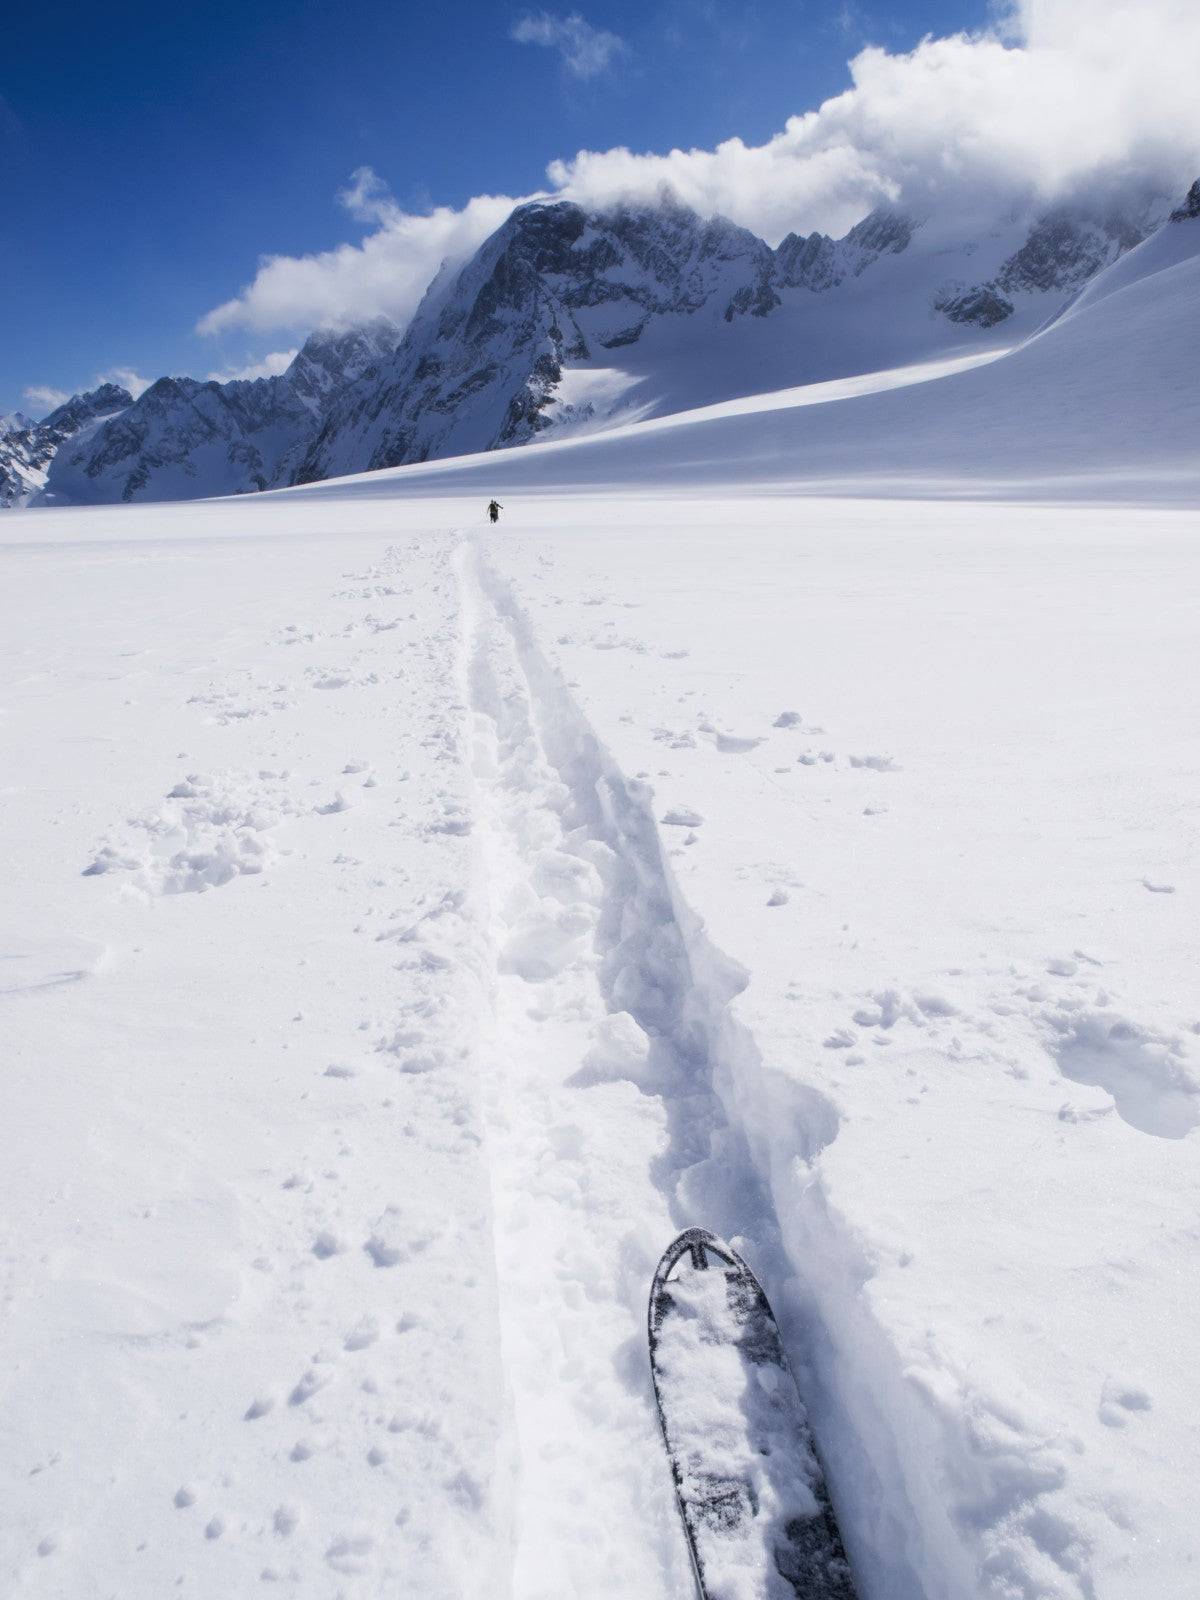 Two distant skiers ski touring across the Ottemma glacier, with skinning tracks - Powderaddicts